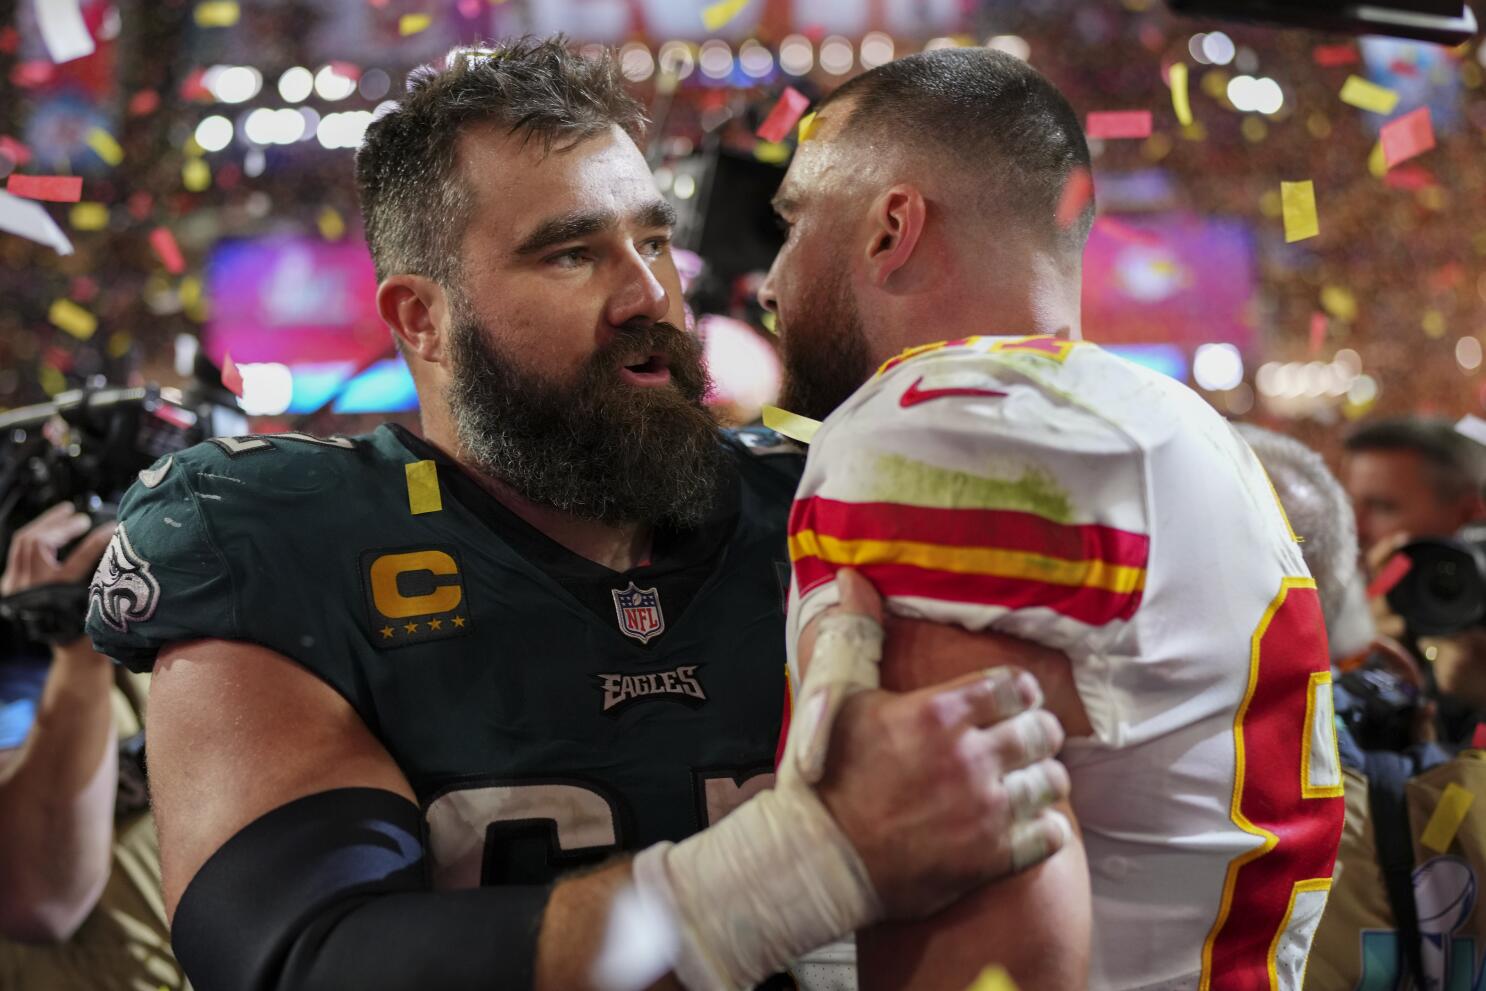 Why was Chiefs star Travis Kelce wearing an Eagles jersey and